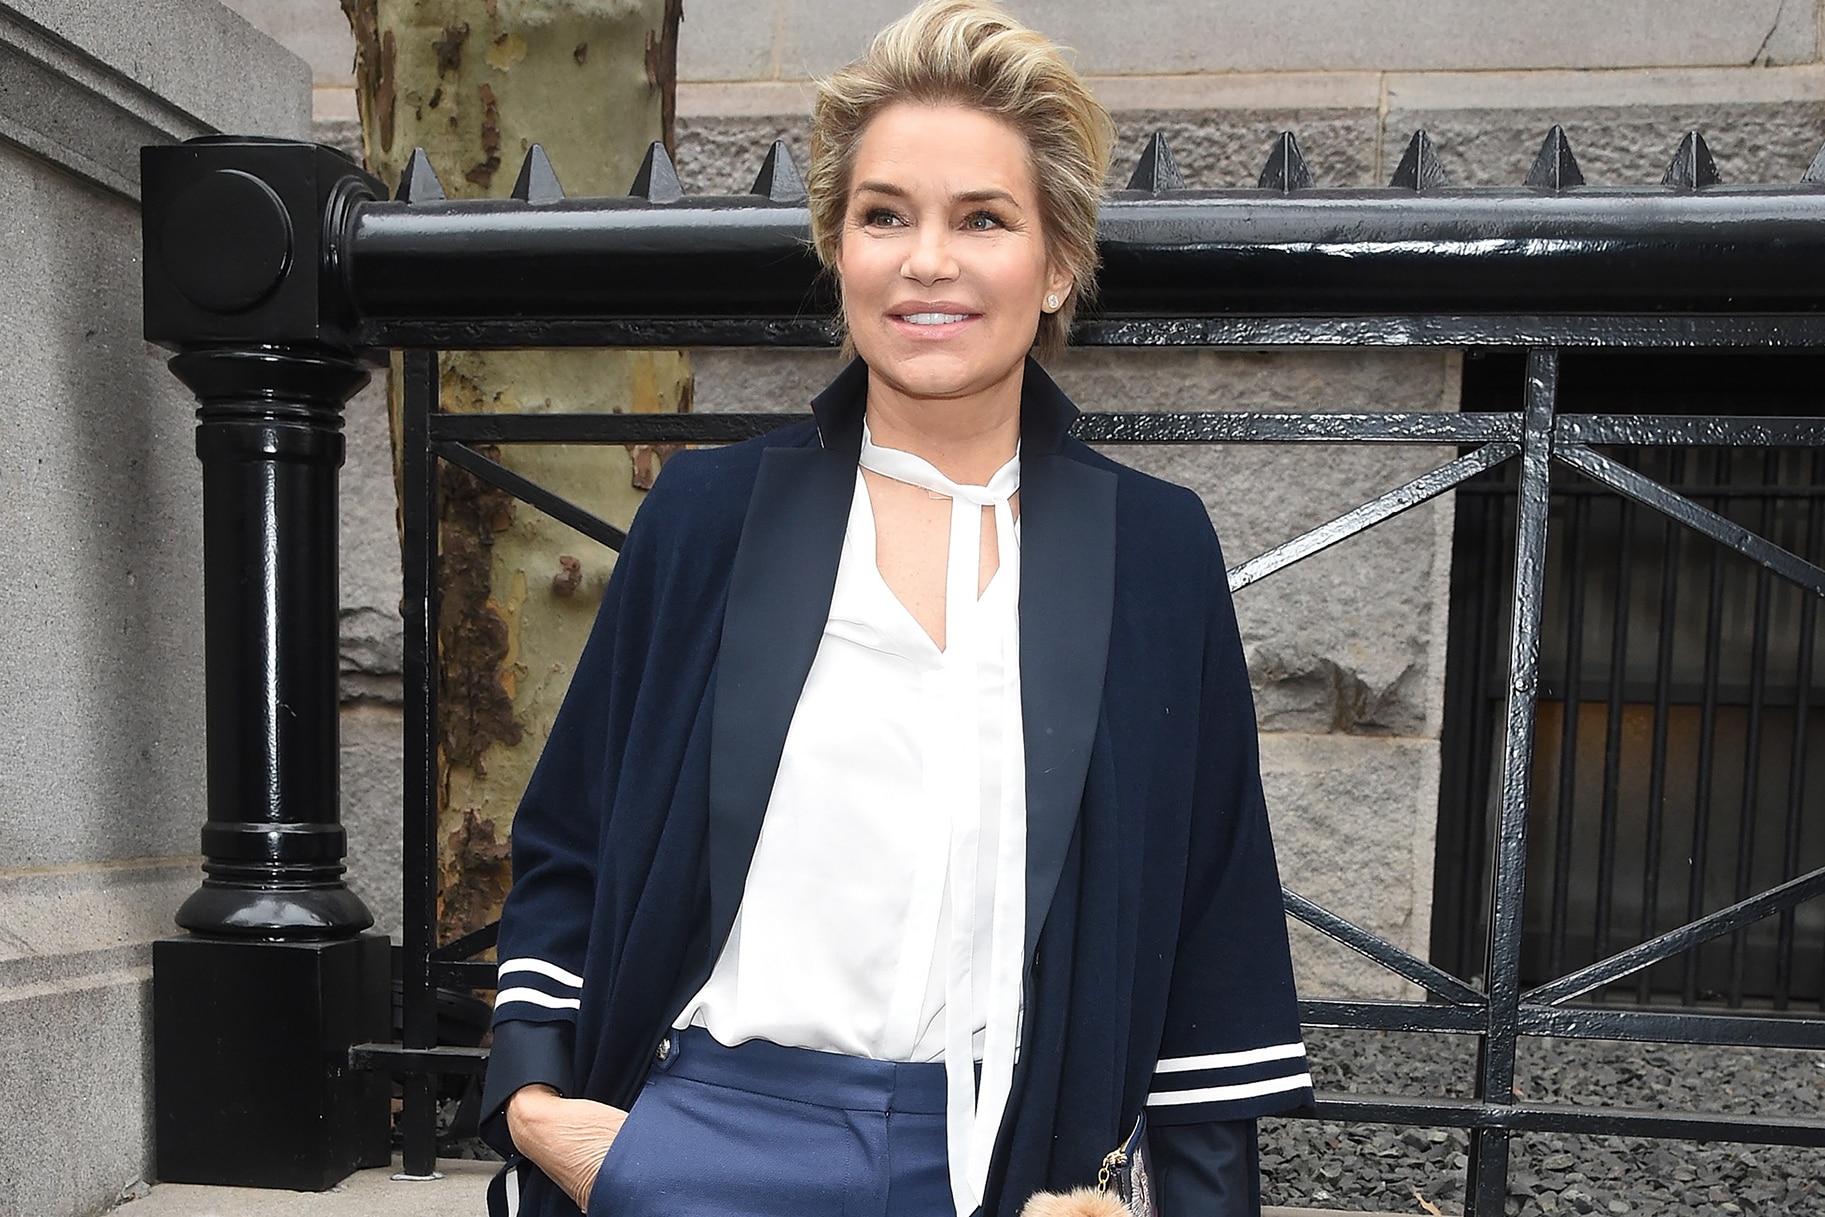 Yolanda Hadid Reveals How She Co-Parents with Her Ex.